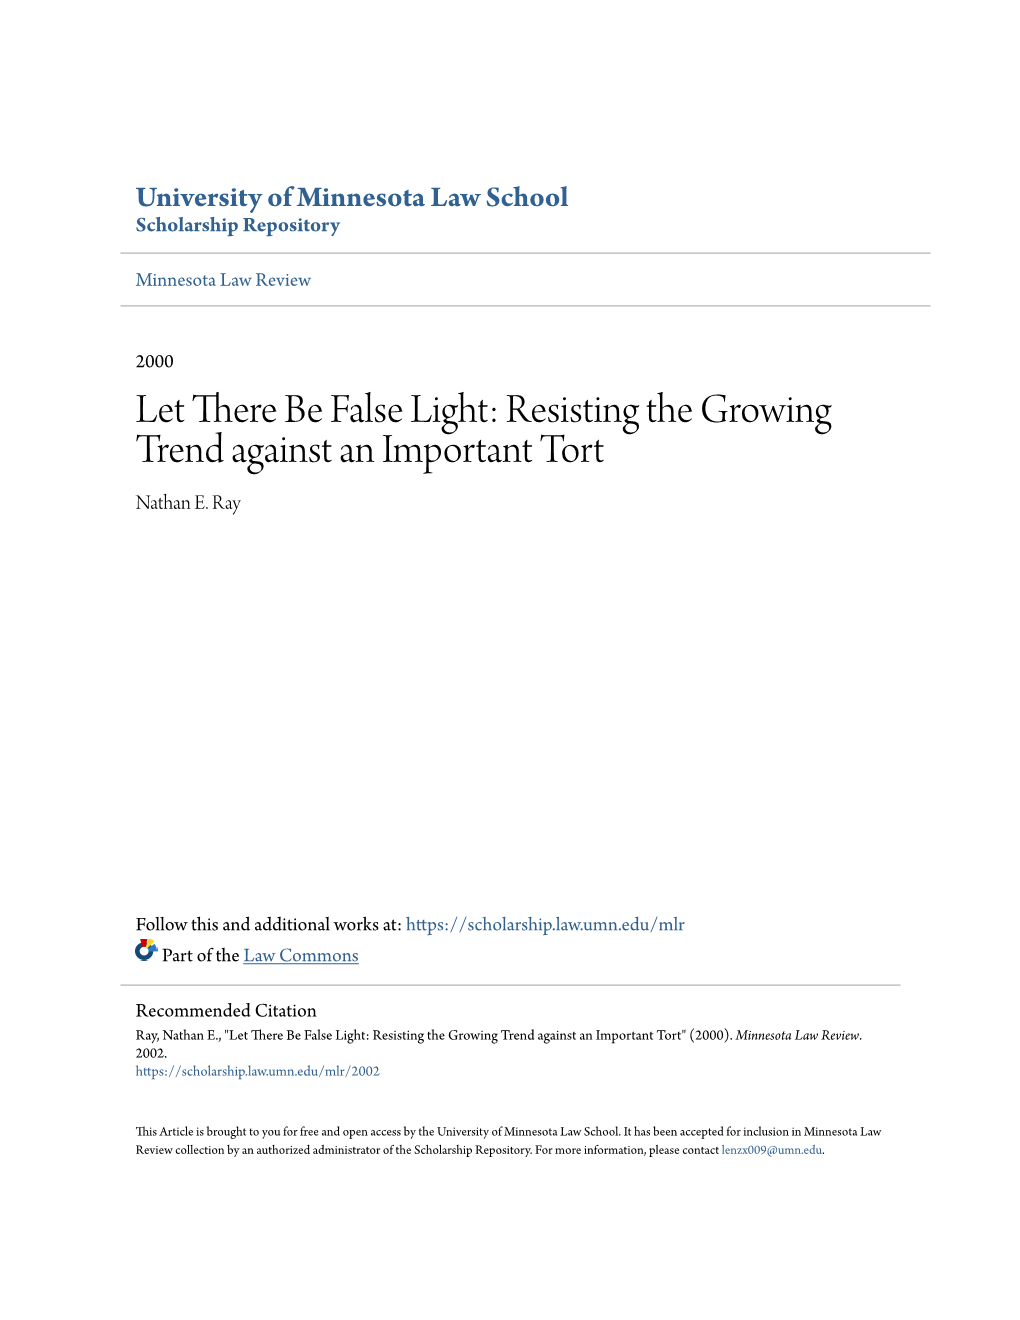 Let There Be False Light: Resisting the Growing Trend Against an Important Tort Nathan E